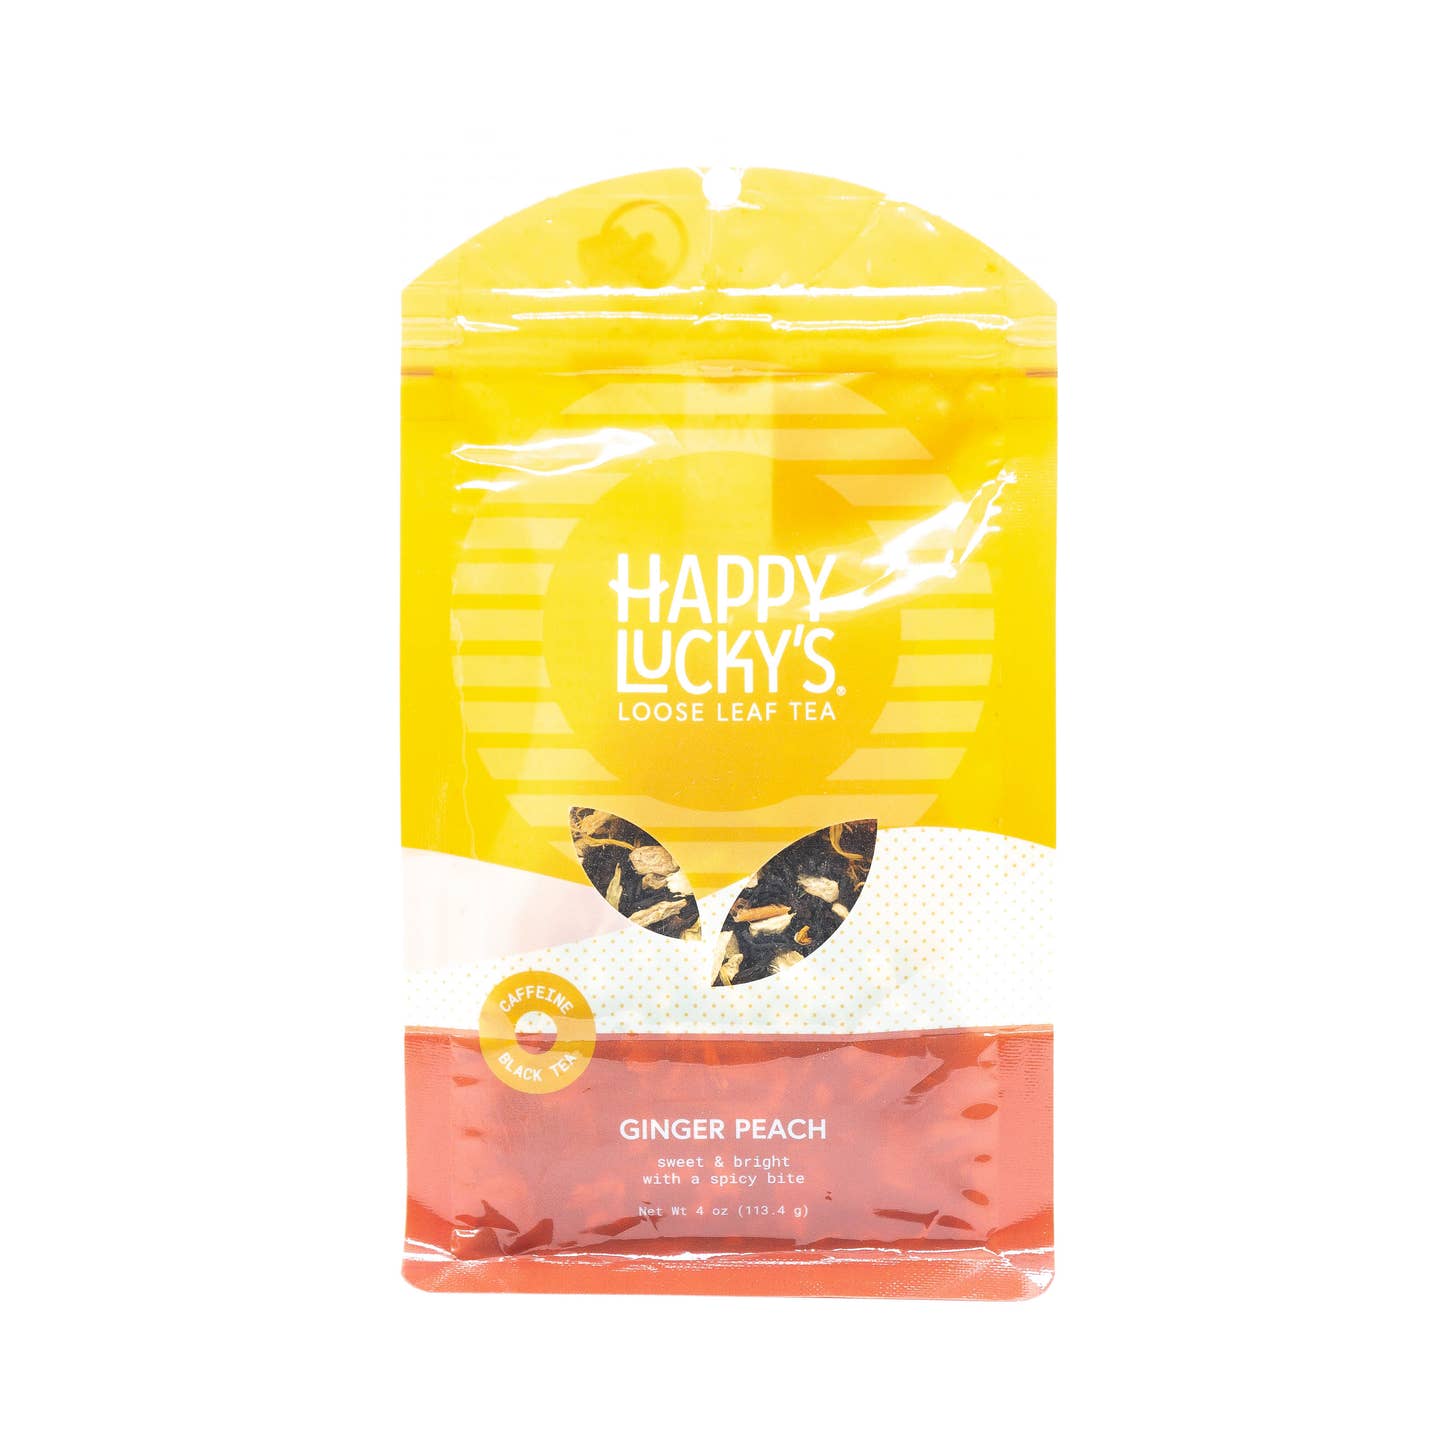 Shop Ginger Peach by Happy Lucky's at Sips by